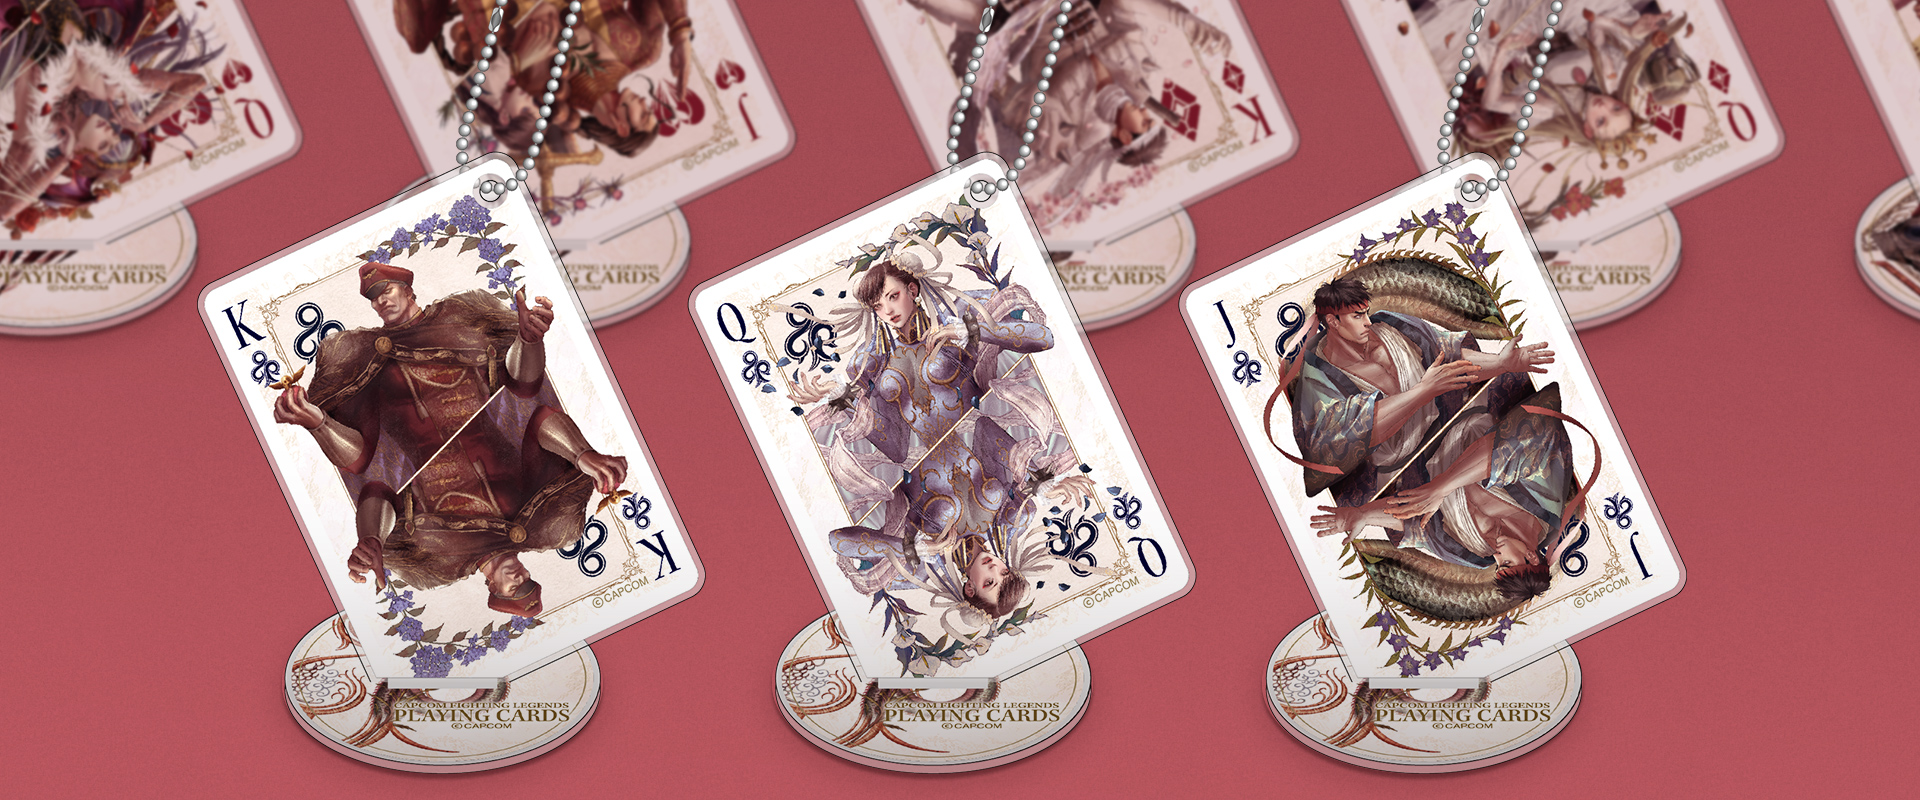 FIGHTING COLLECTION × Playing Cards design アクリルスタンド